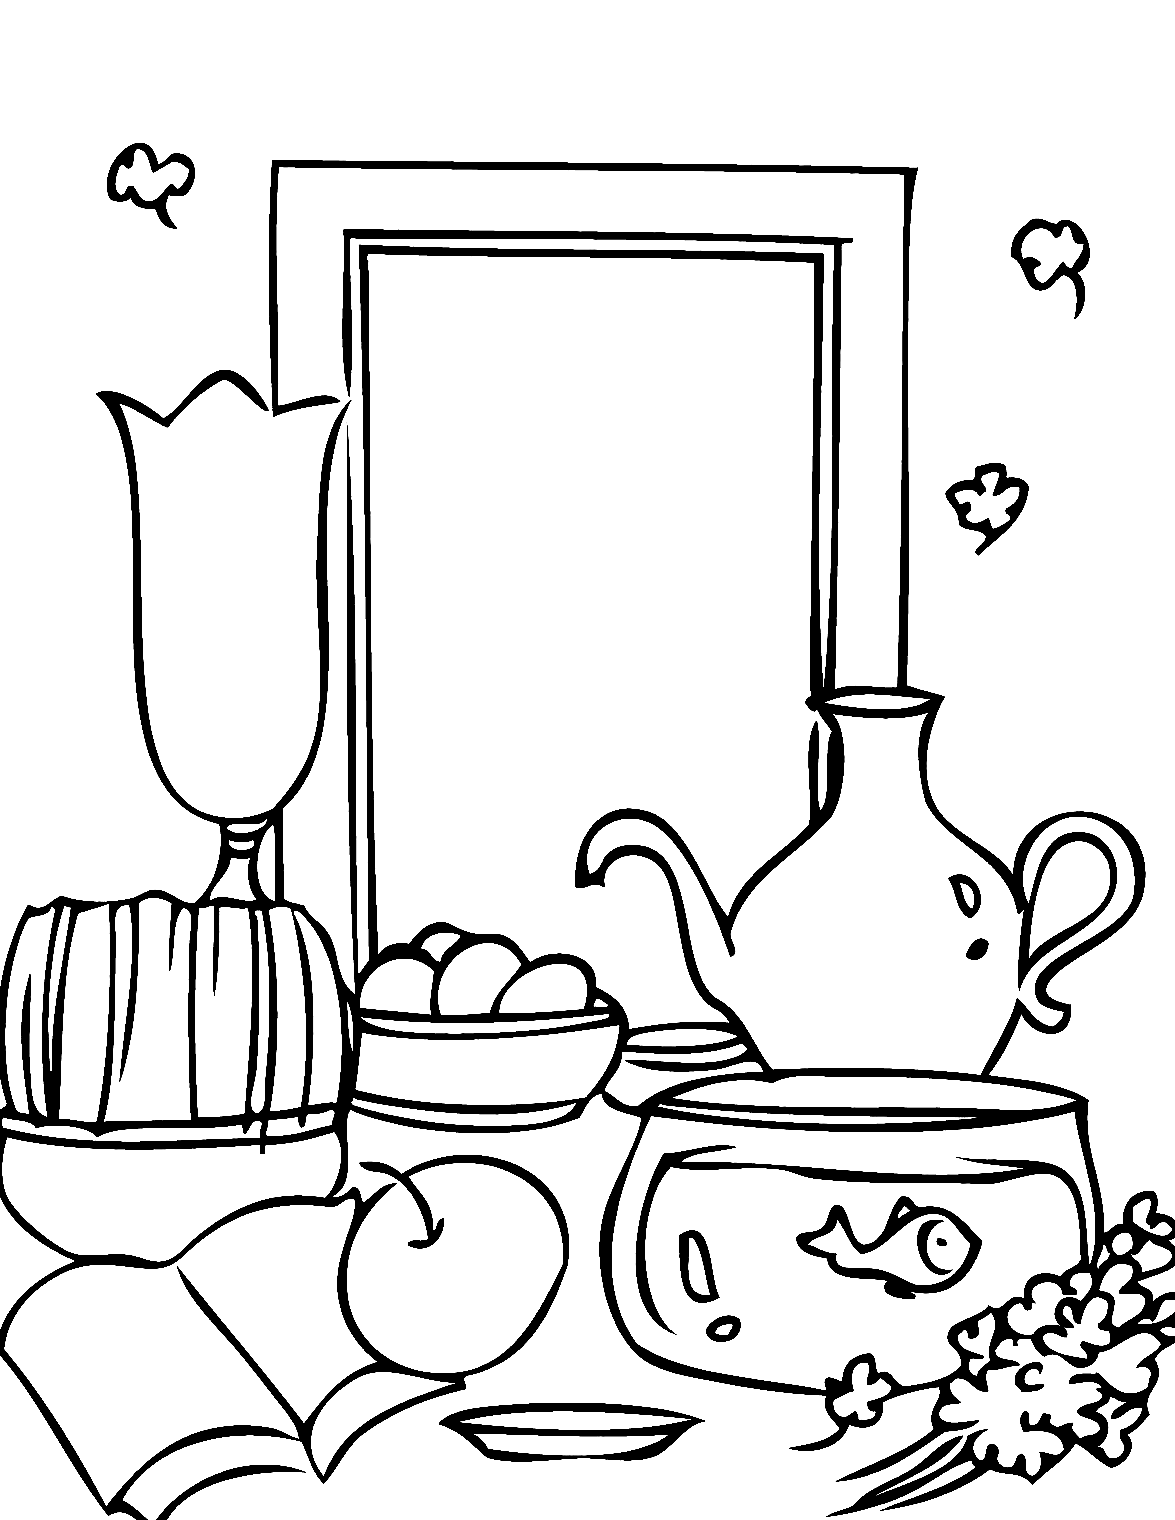 International Day of Nowruz Coloring Pages